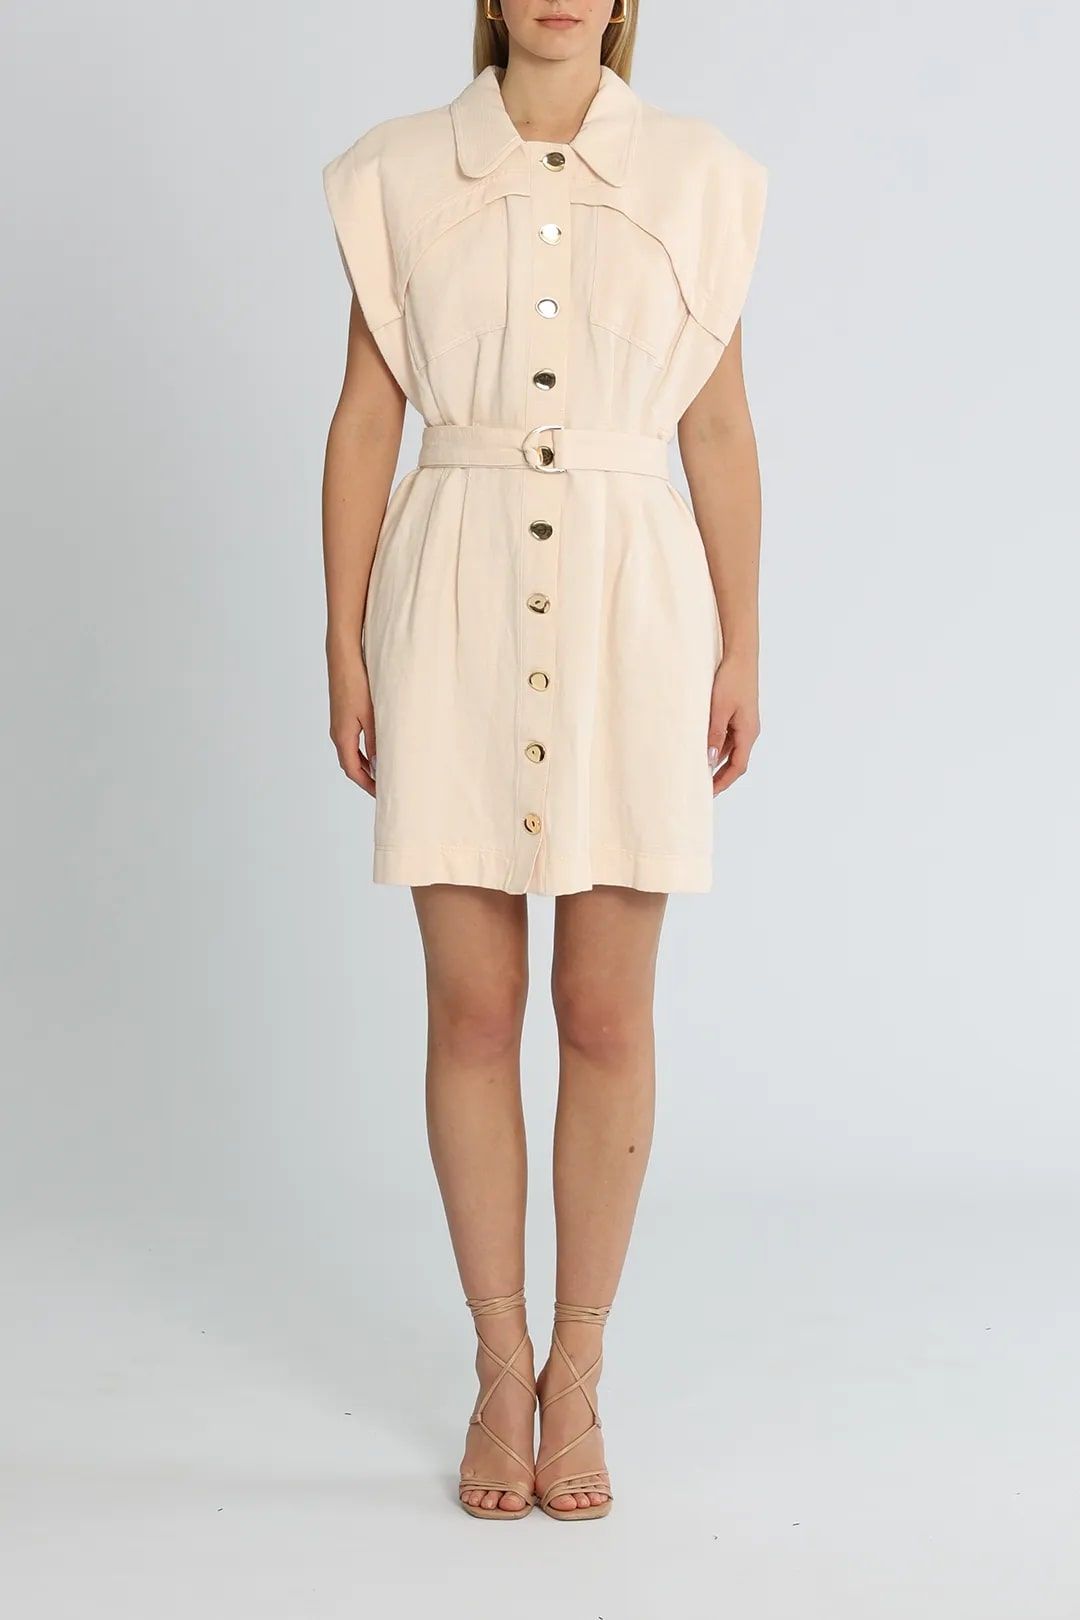 Front view of Acler Westcroft Dress in Blush for hire